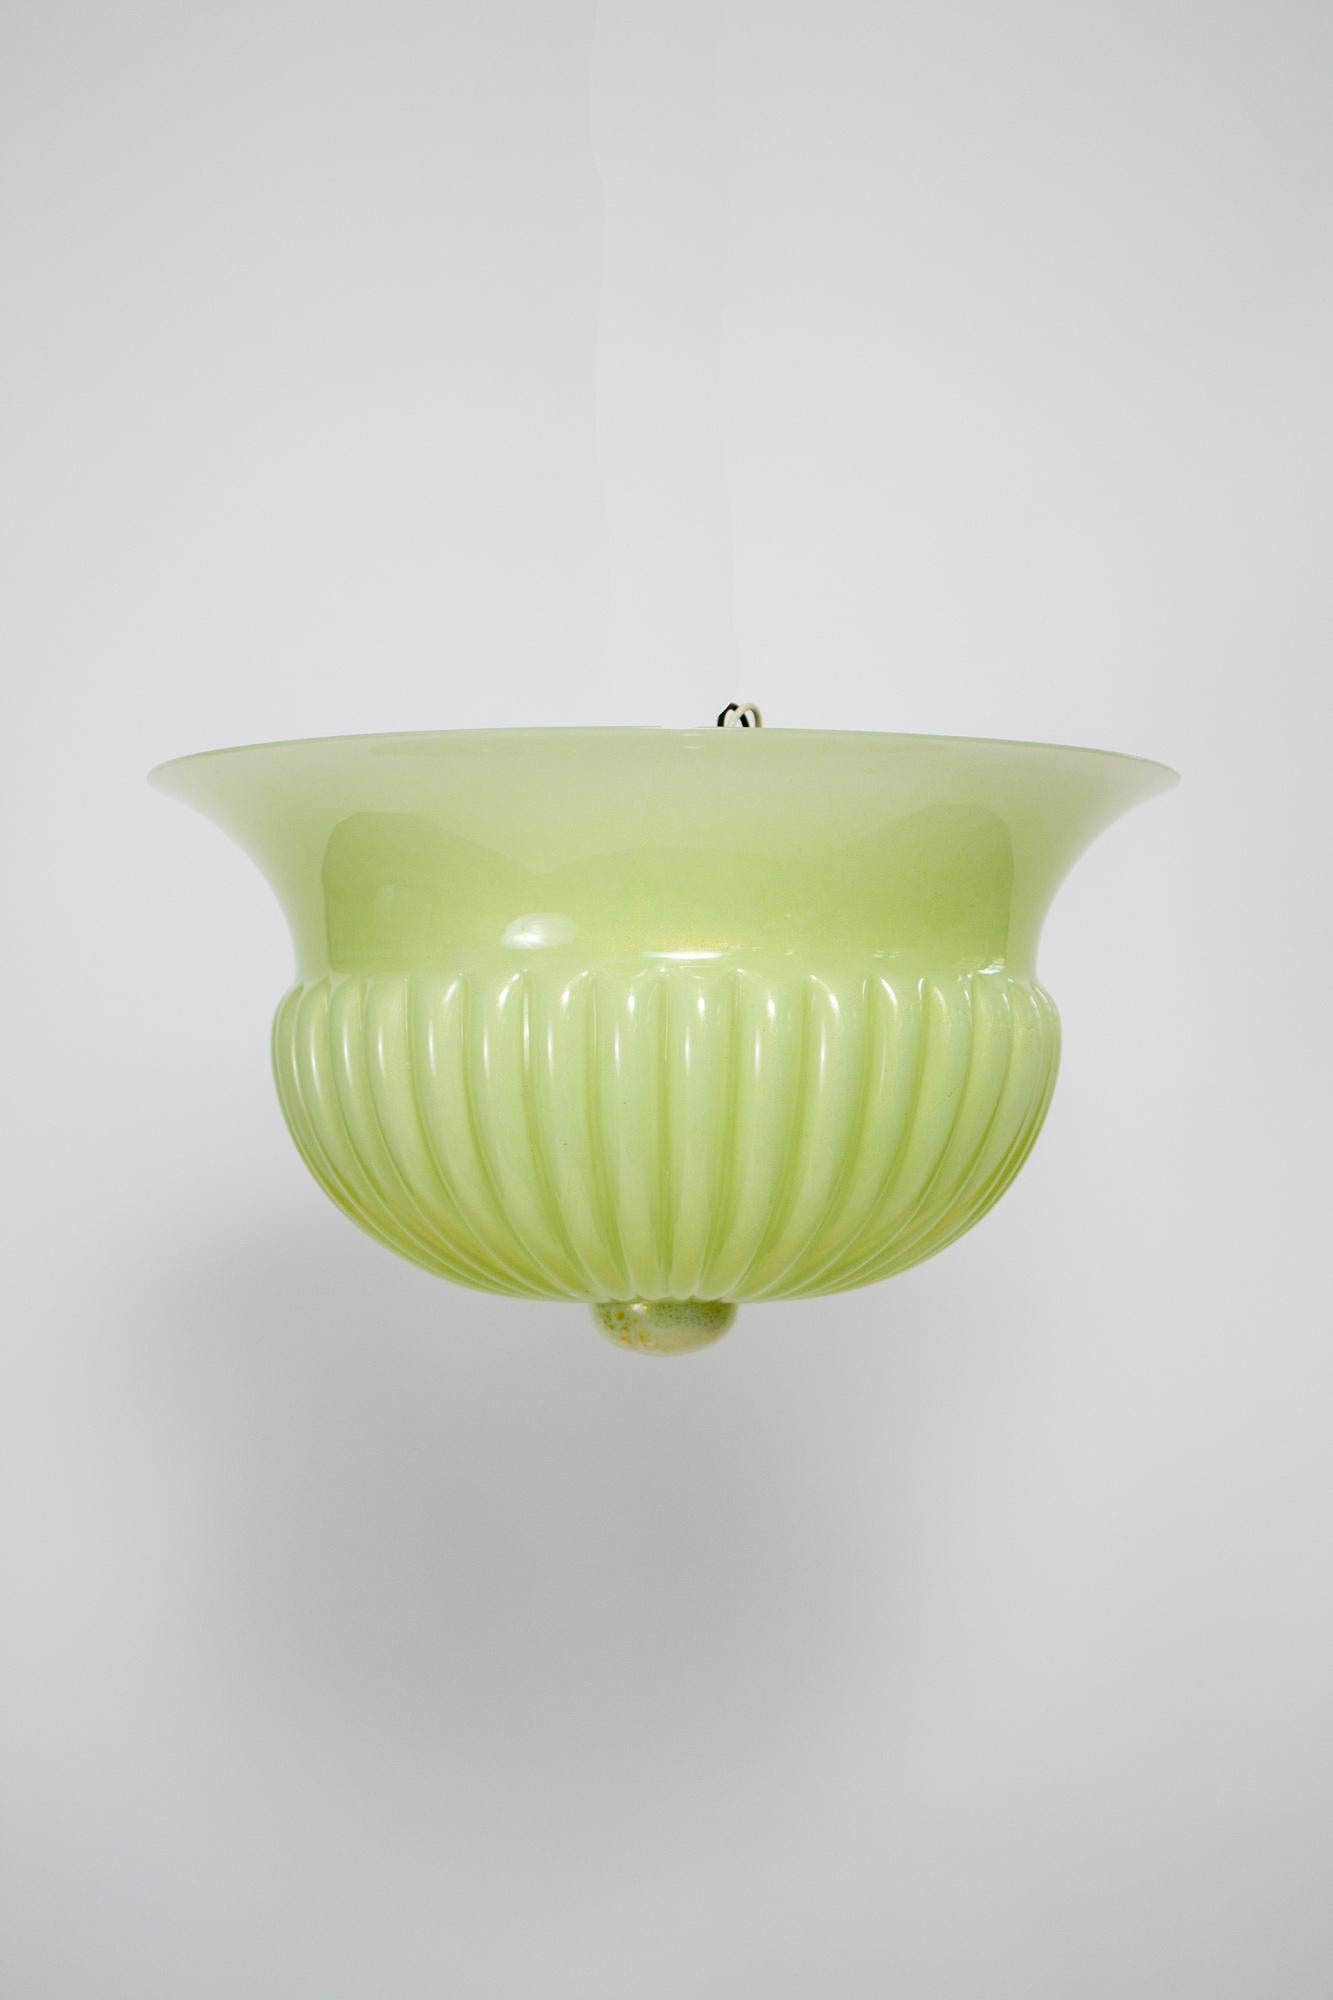 This is a beautiful piece of Barovier & Toso glass. It is a creamy light green color with gold flecks concentrated around the center and throughout the glass. Fluted edge, smooth and the top with ribbing at the bottom, and comes together with a